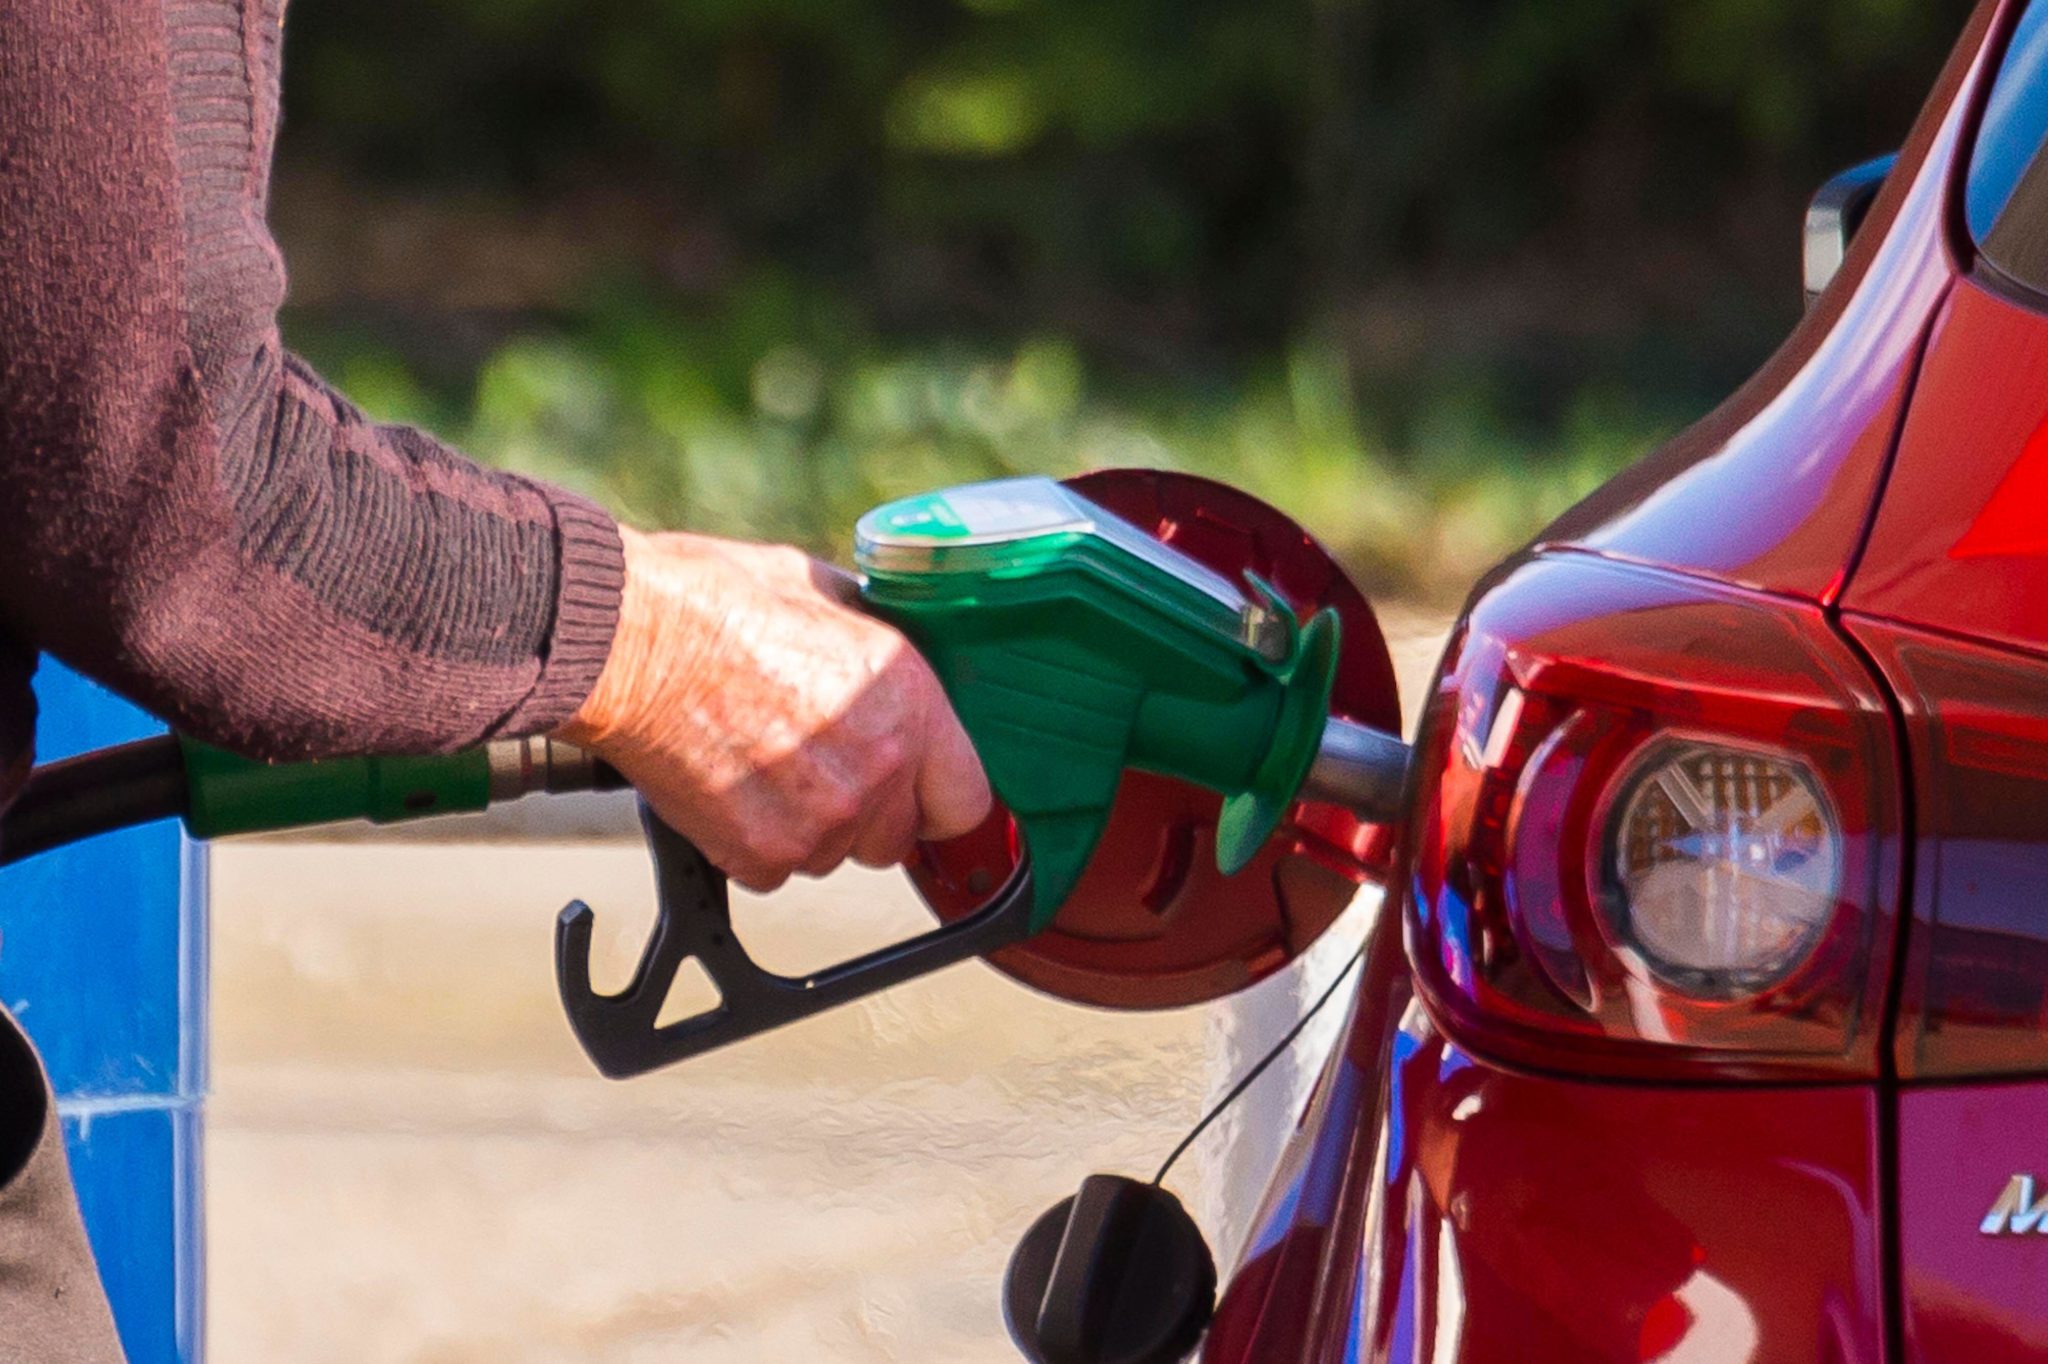 A man filling his car up with fuel at a petrol station in February 2022